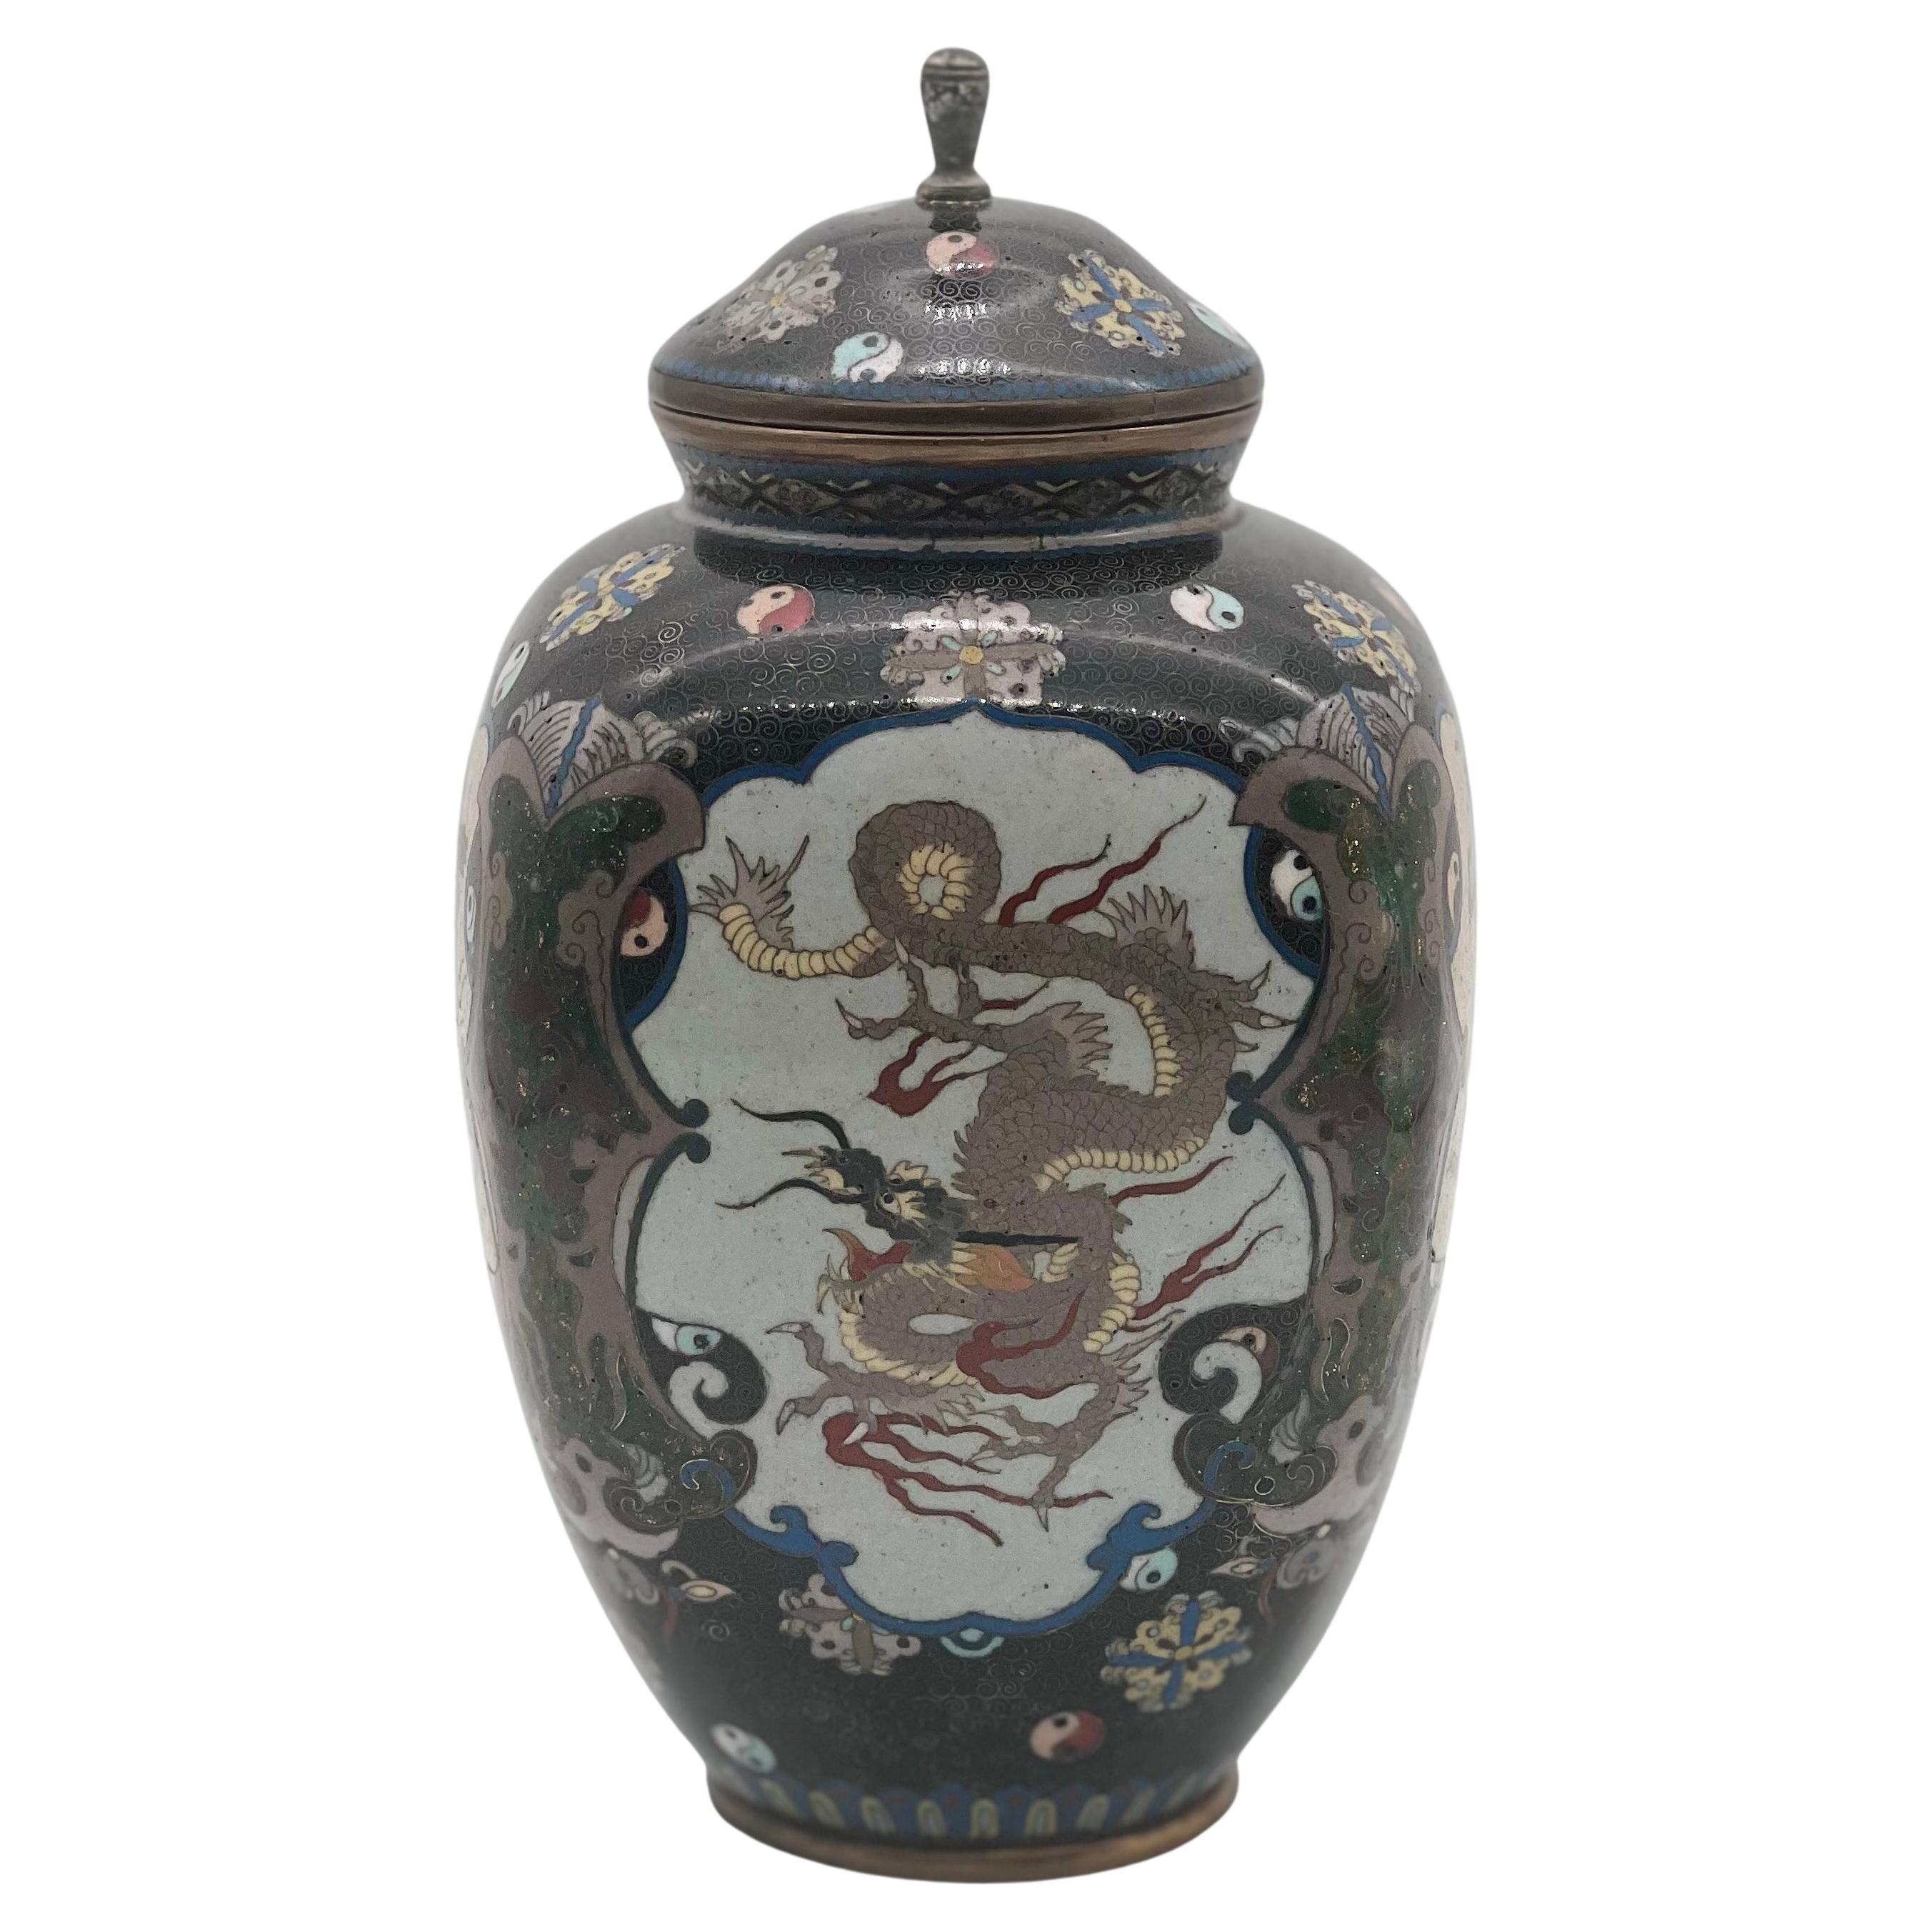 A Fine Japanese Cloisonne Enamel Vase and Cover. Meiji Period 